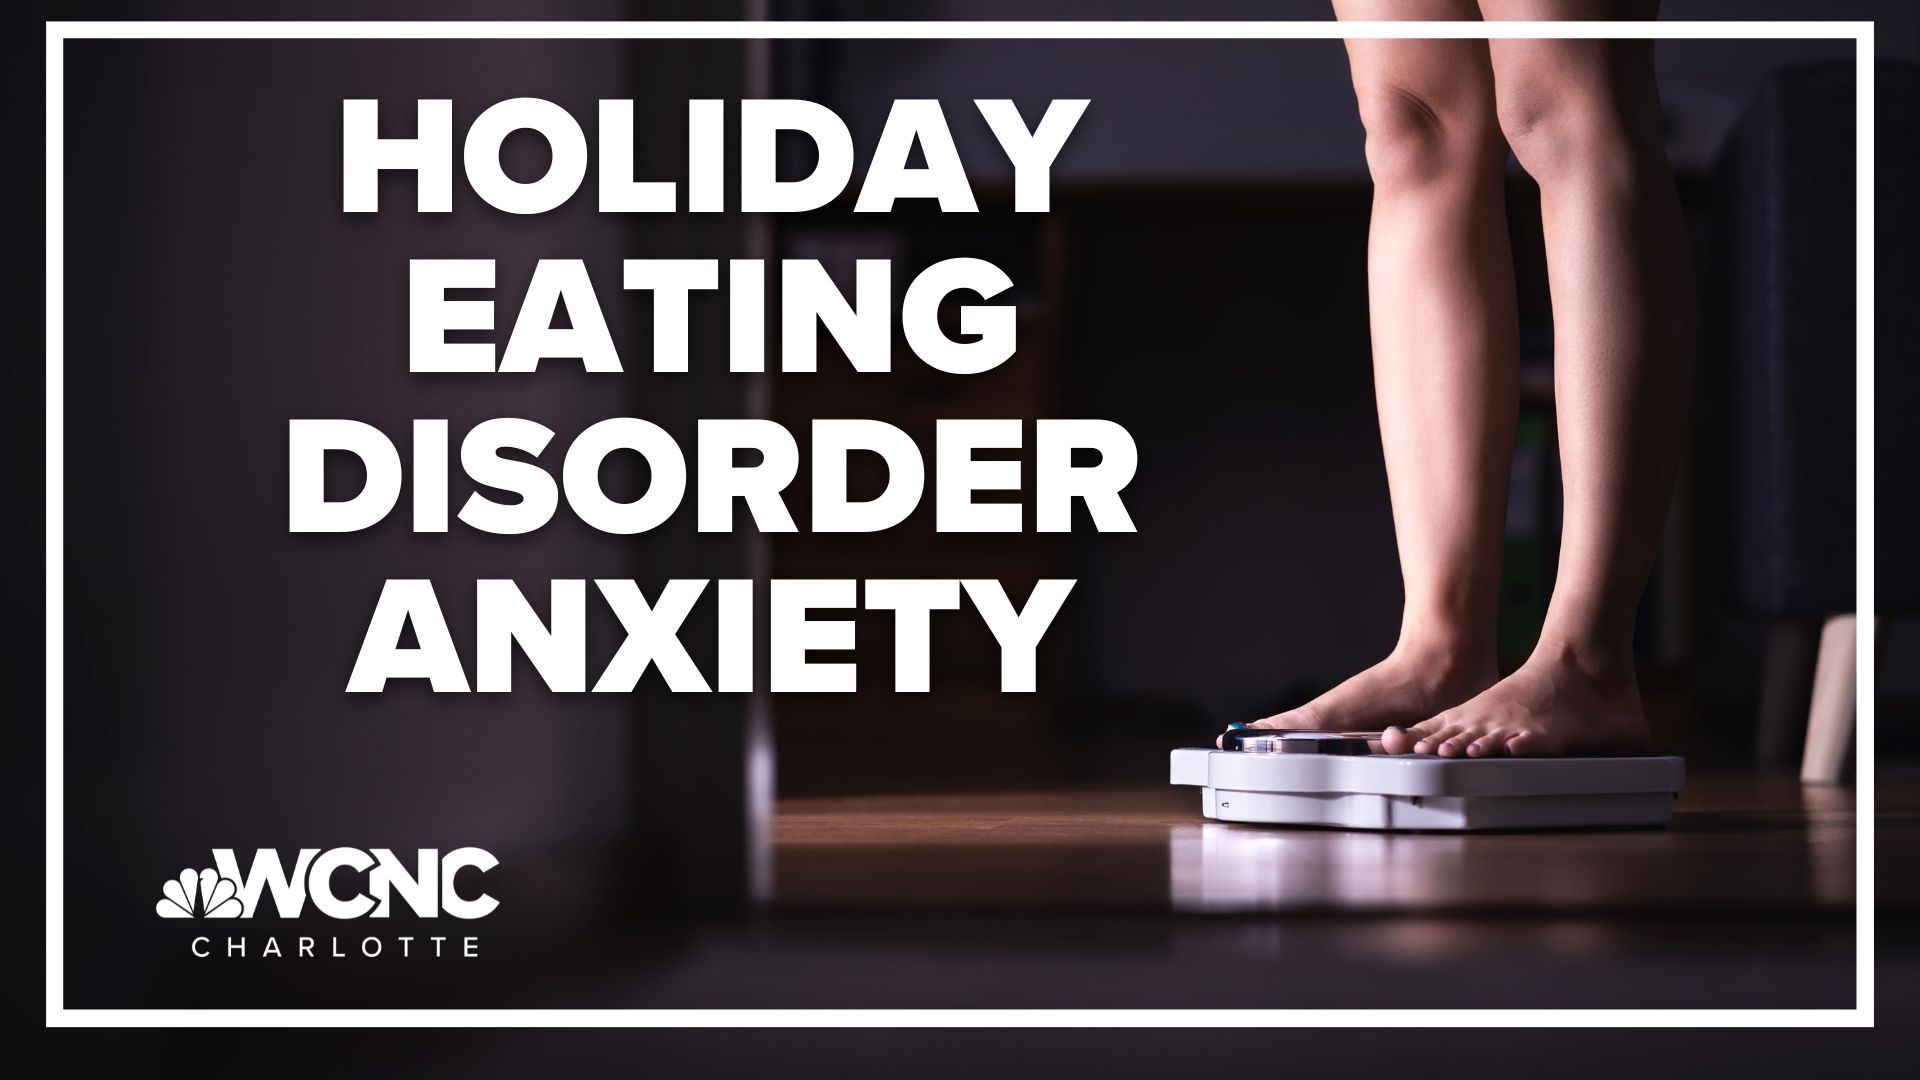 While many are looking forward to Thanksgiving, the holiday can be even harder for people with eating disorders, which can lead to anxiety.